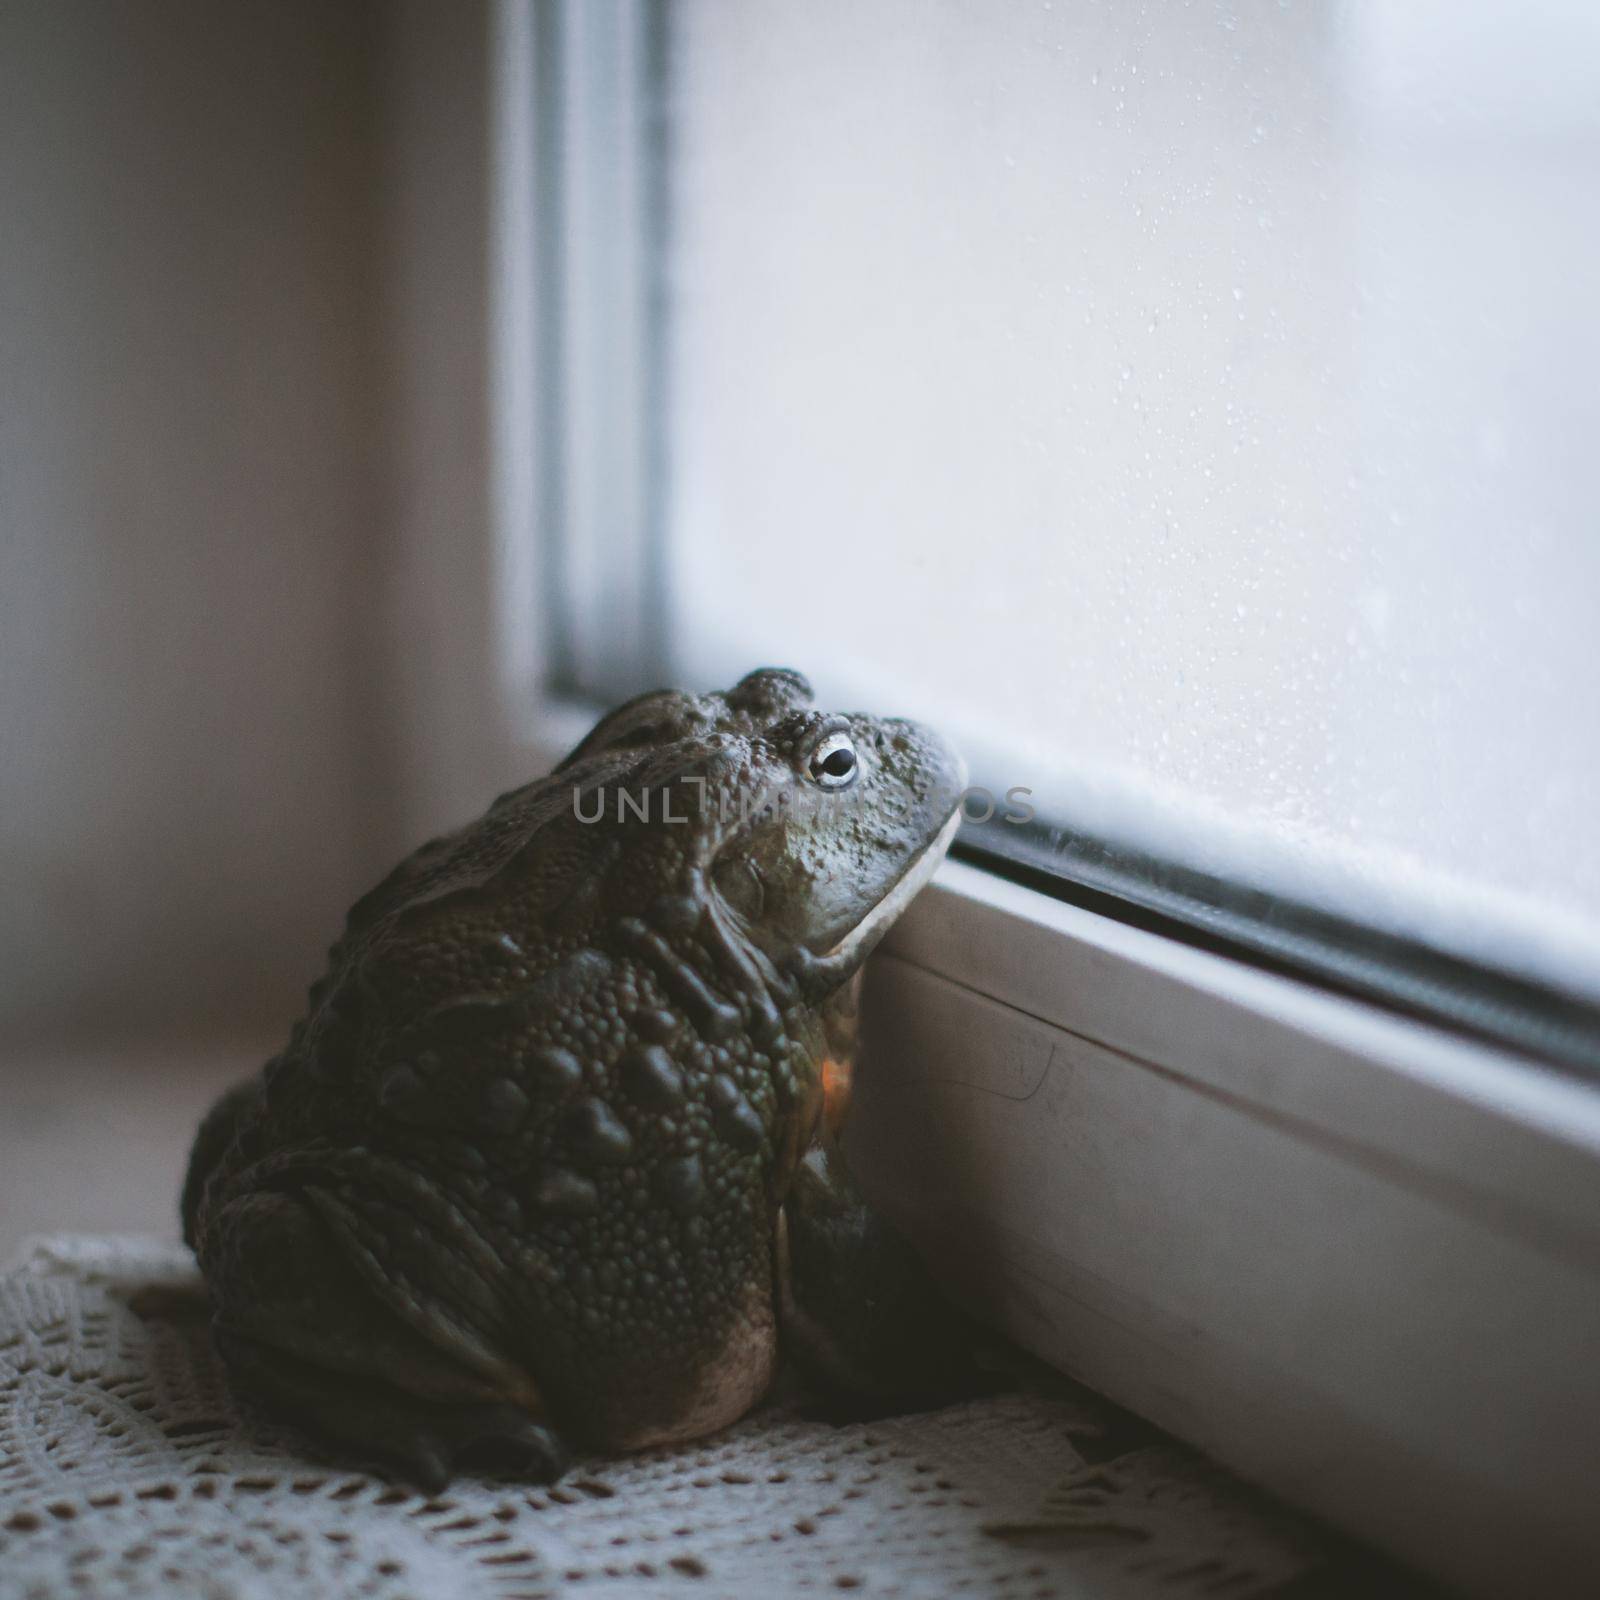 The African bullfrog, Pyxicephalus adspersus, adult male sitting in front of window